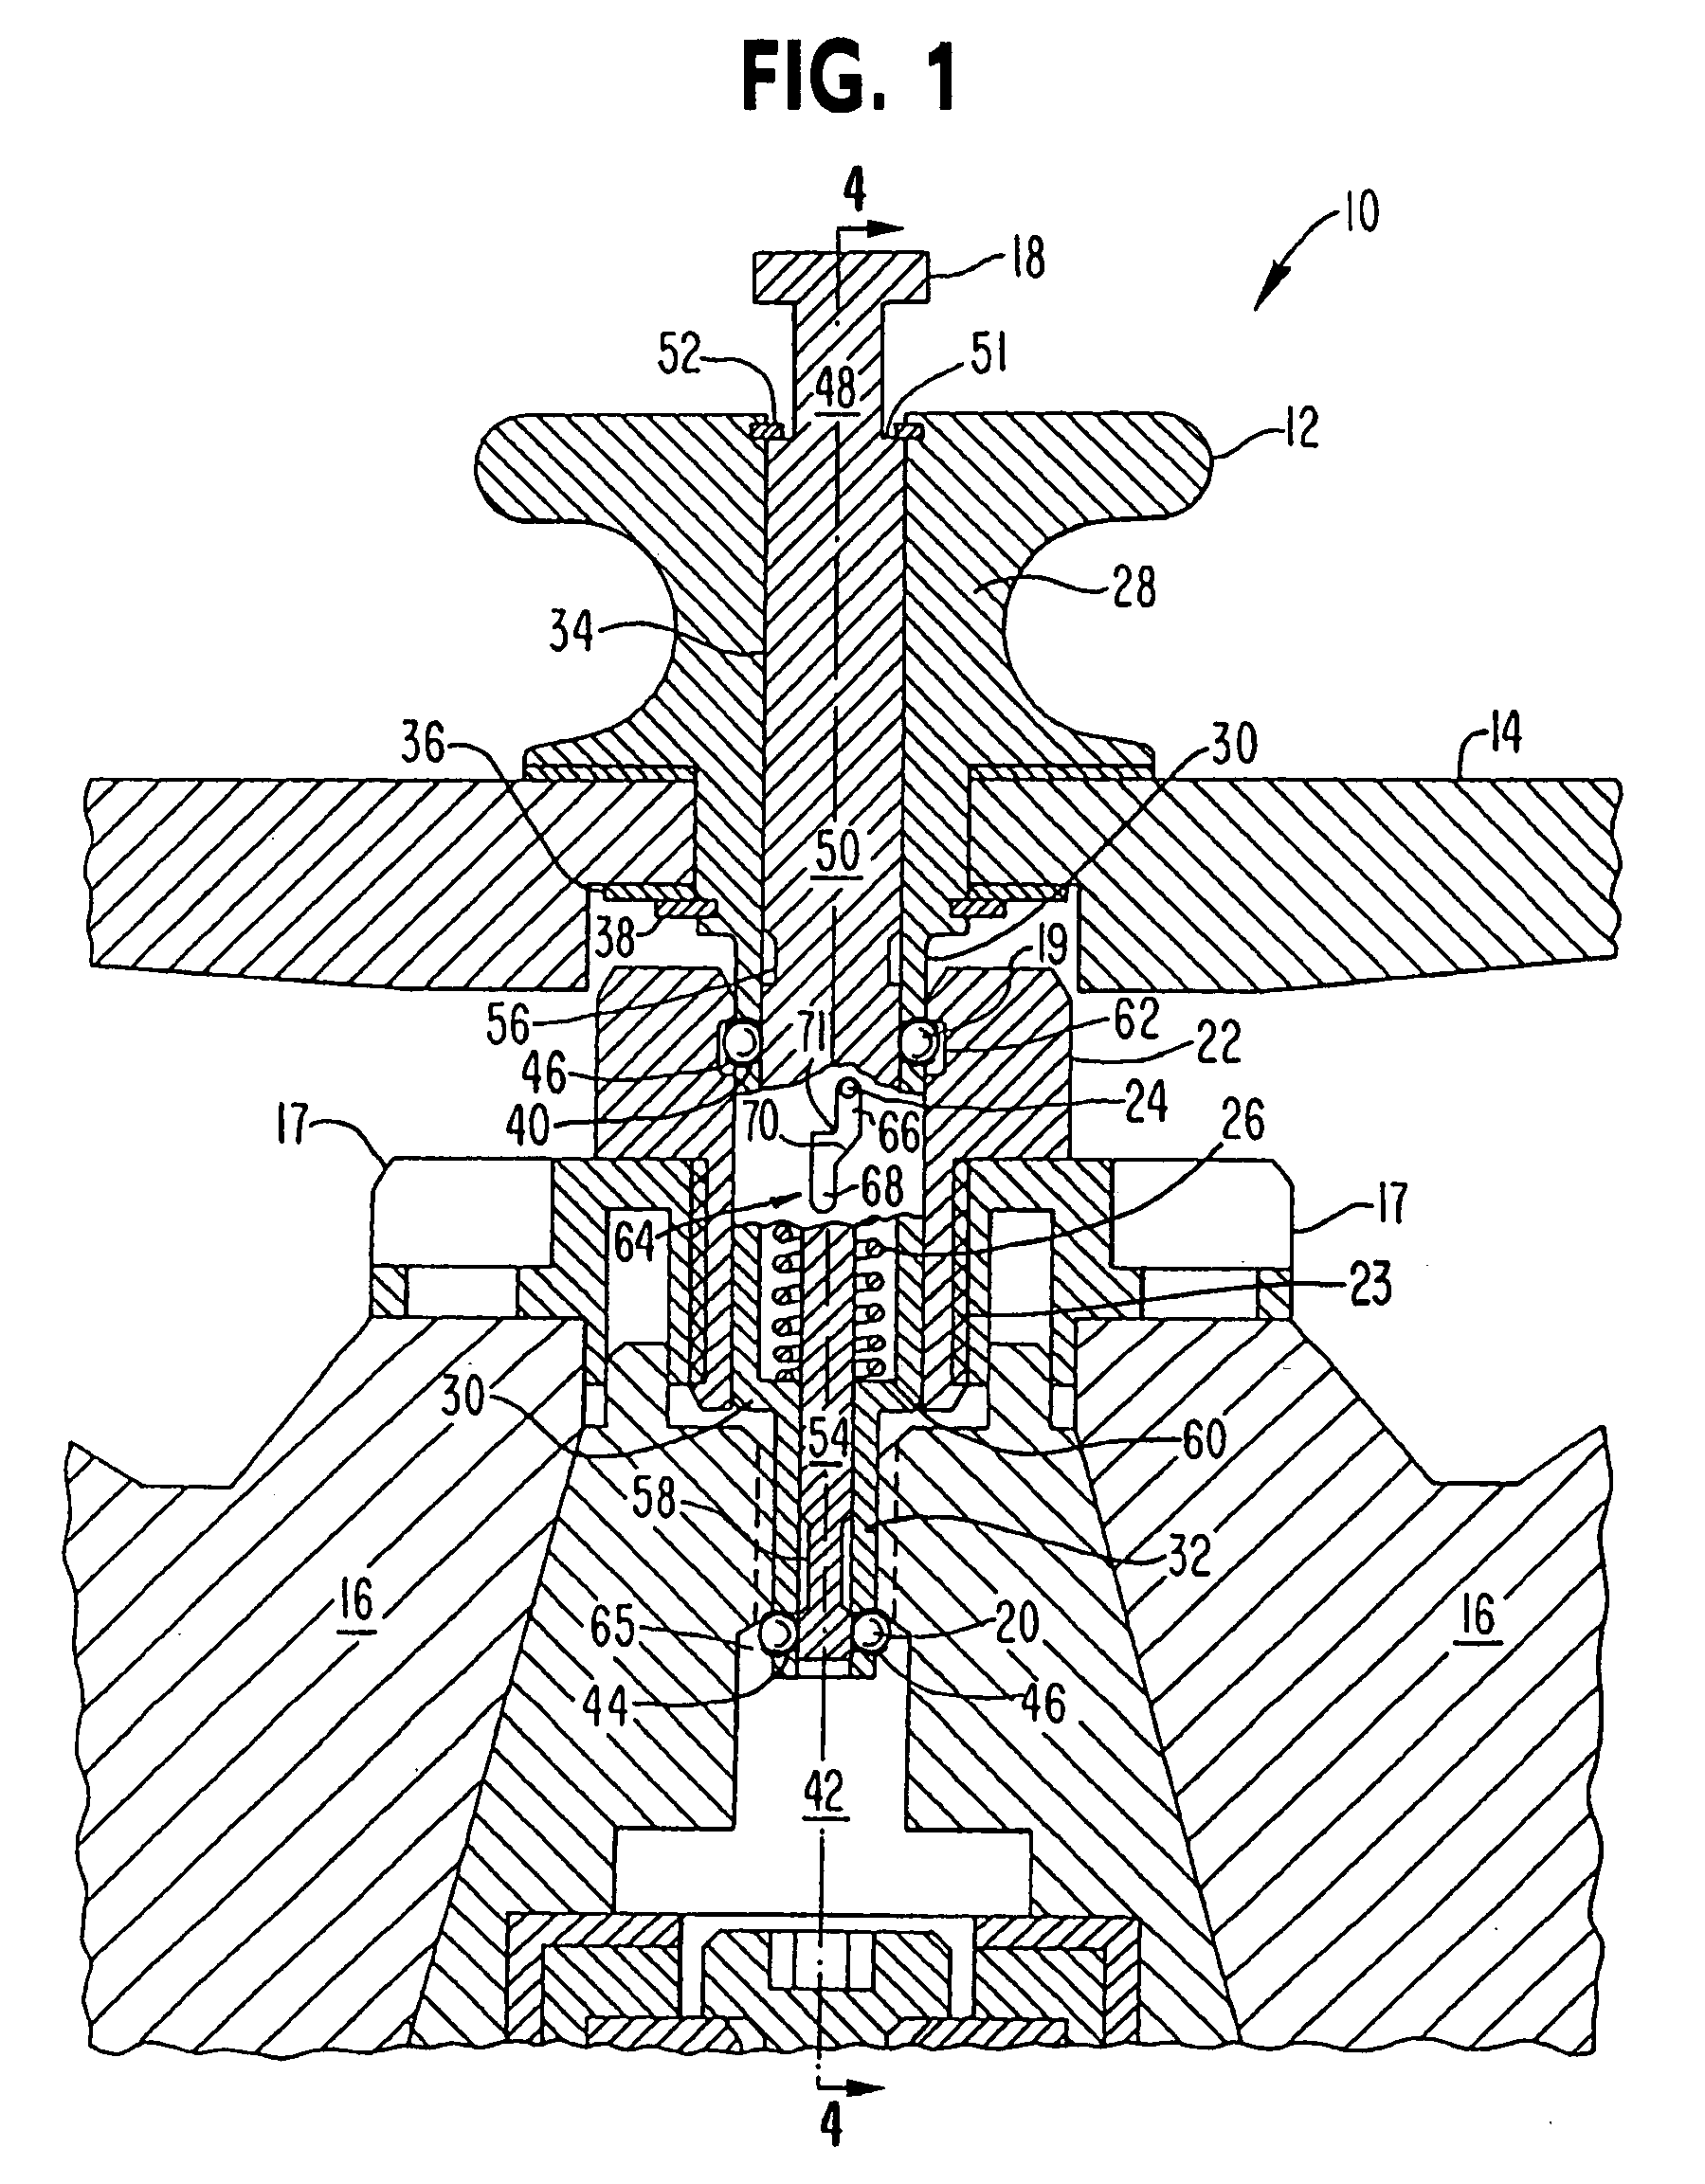 Attachment and release apparatus for a centrifuge rotor cover